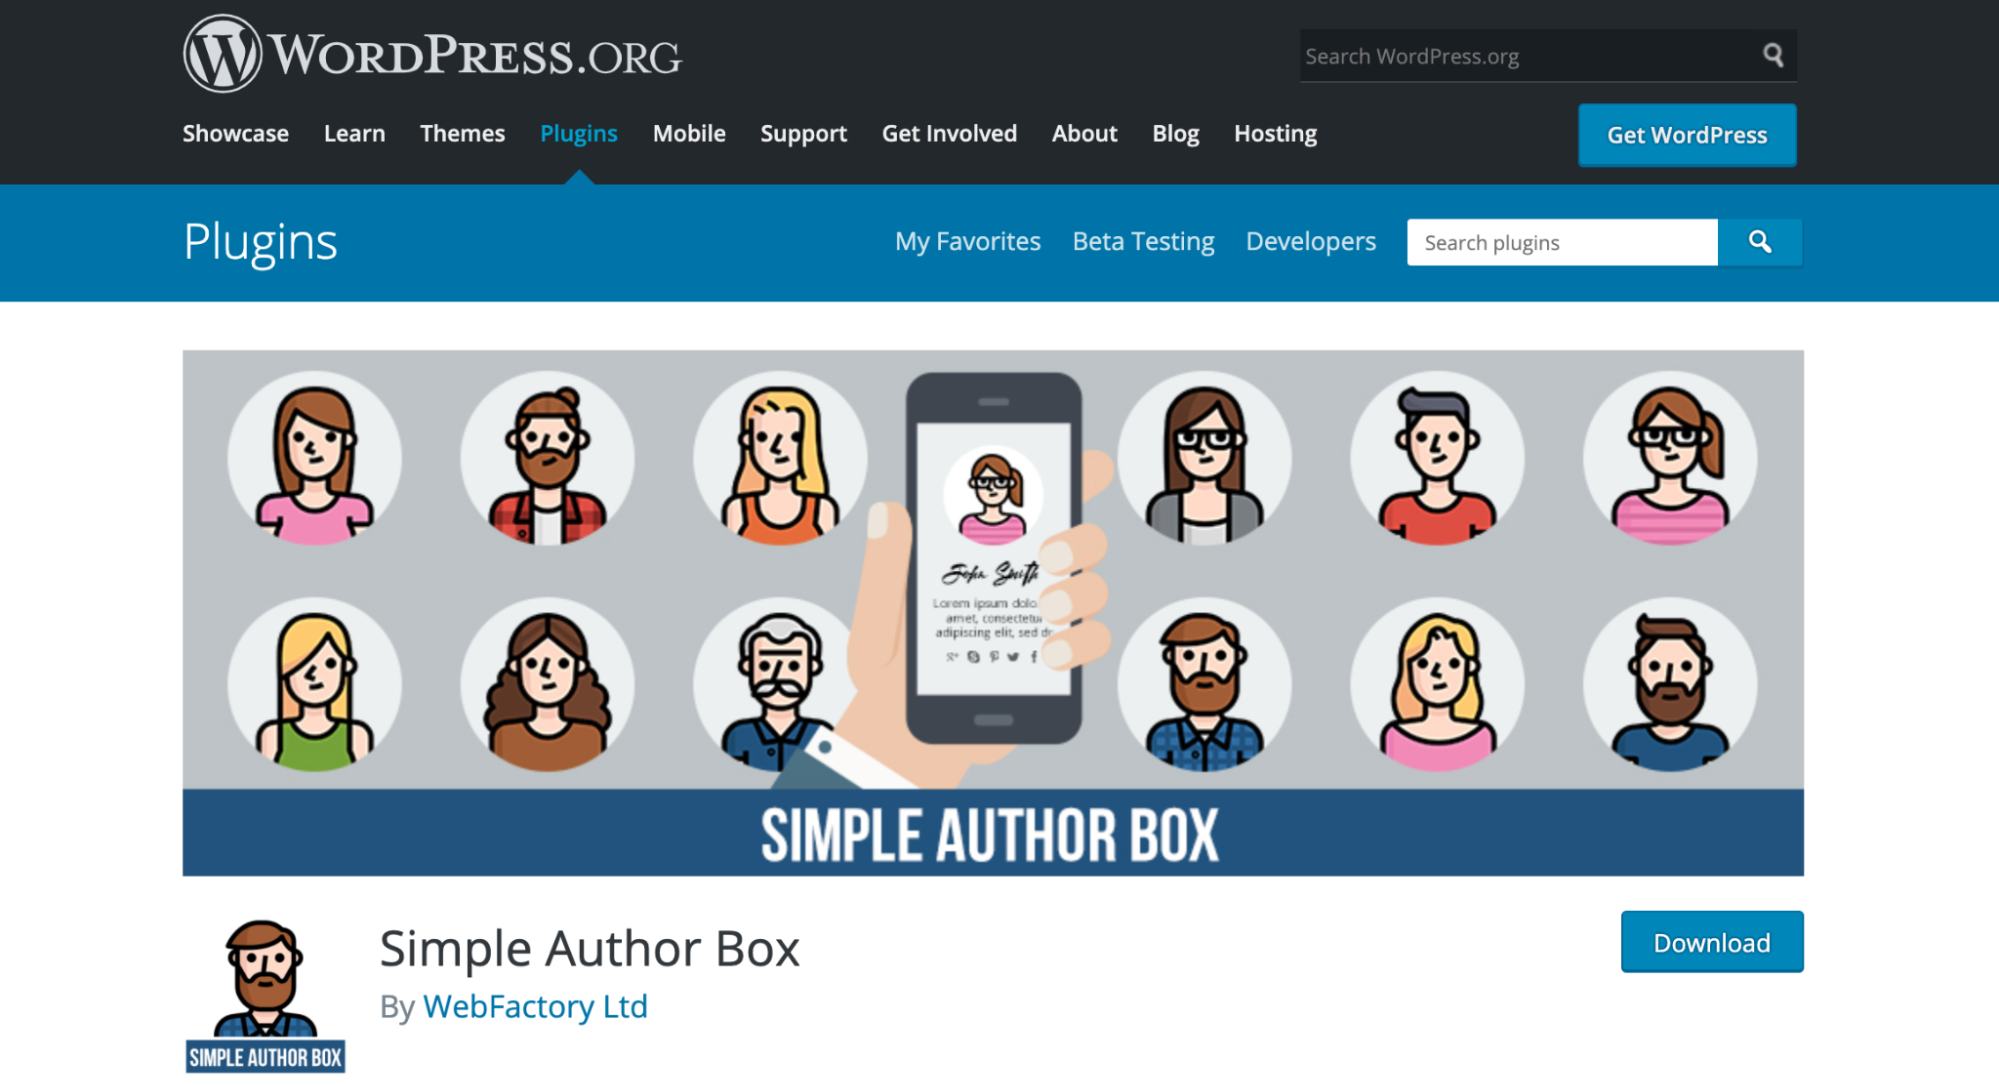 Simple Author Box home page